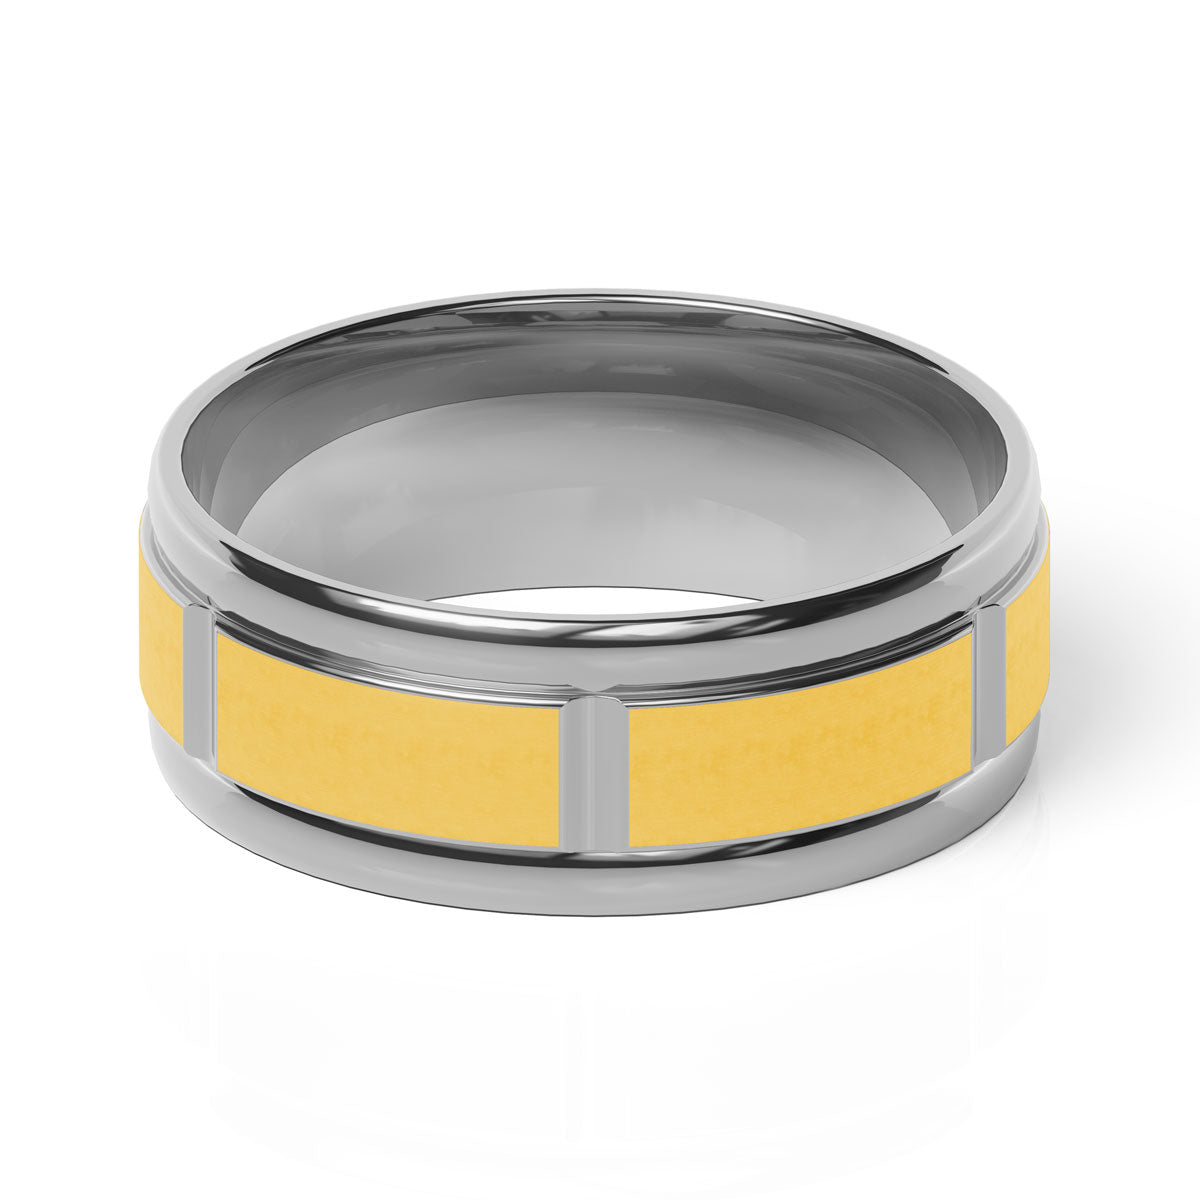 Comfort Fit 8MM Carved Wedding Band with Grooved Satin Inlay